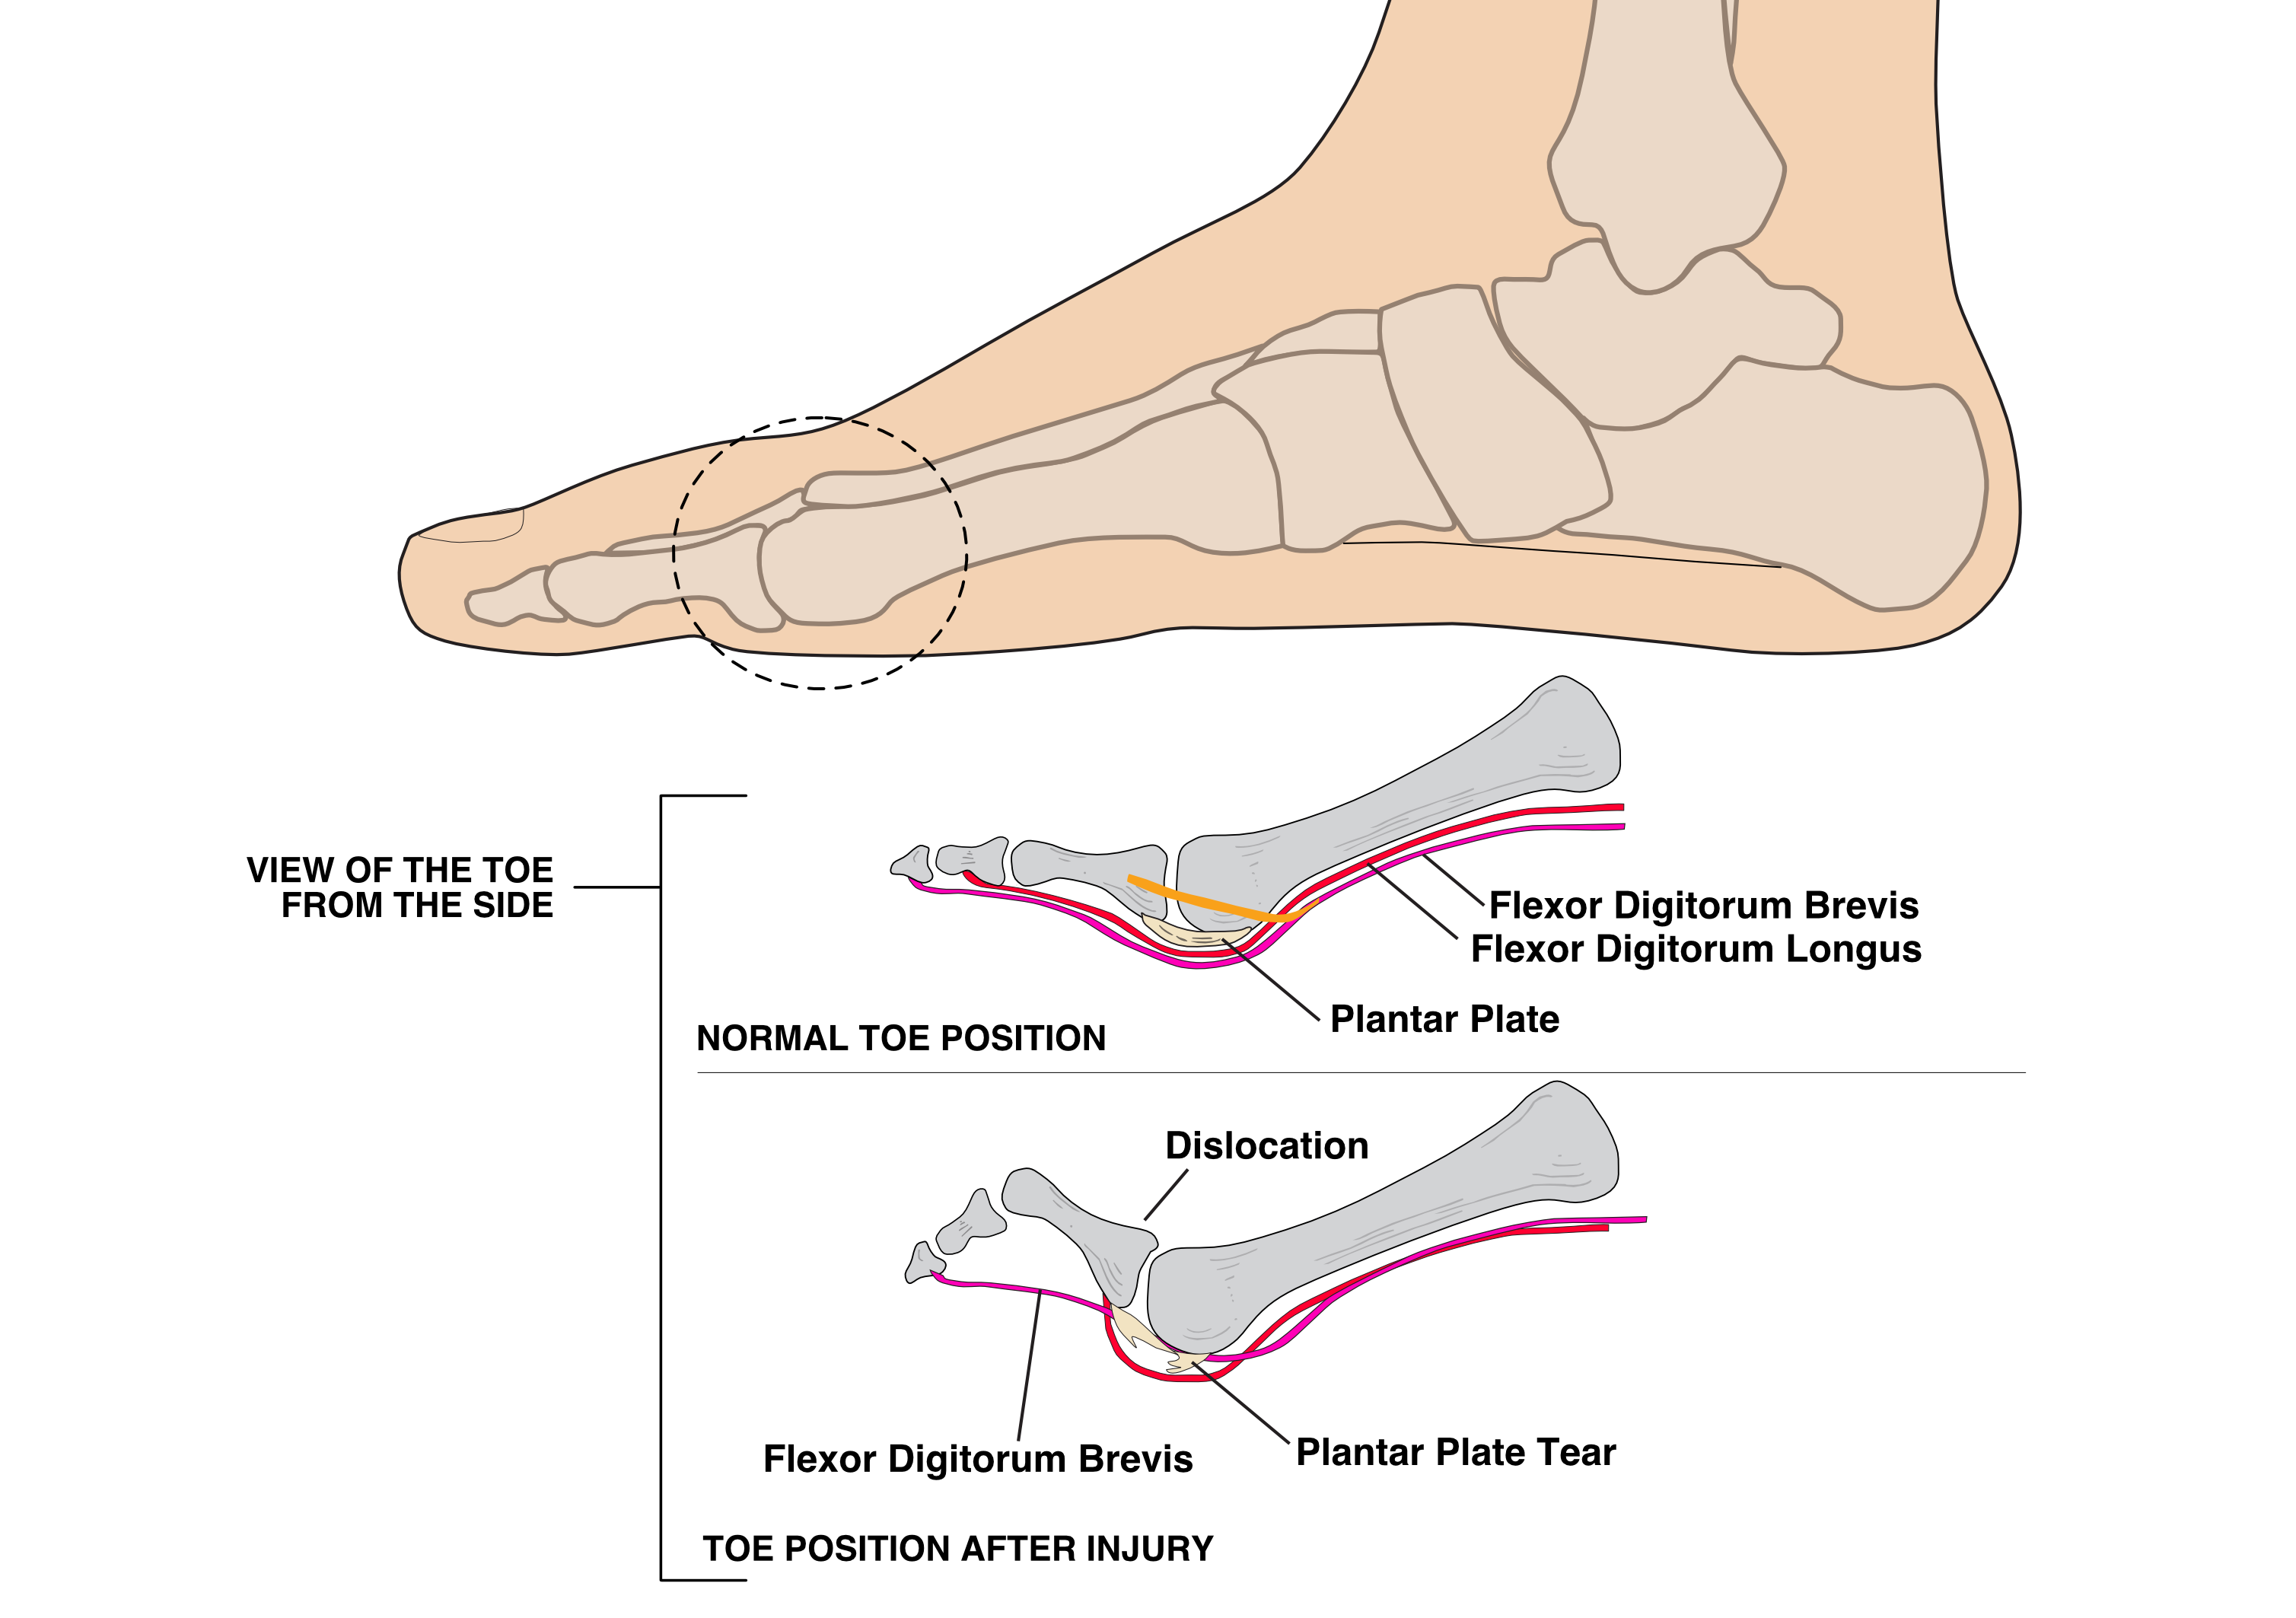 Illustration of the side of the toe showing the changing tissue following a plantar plate injury